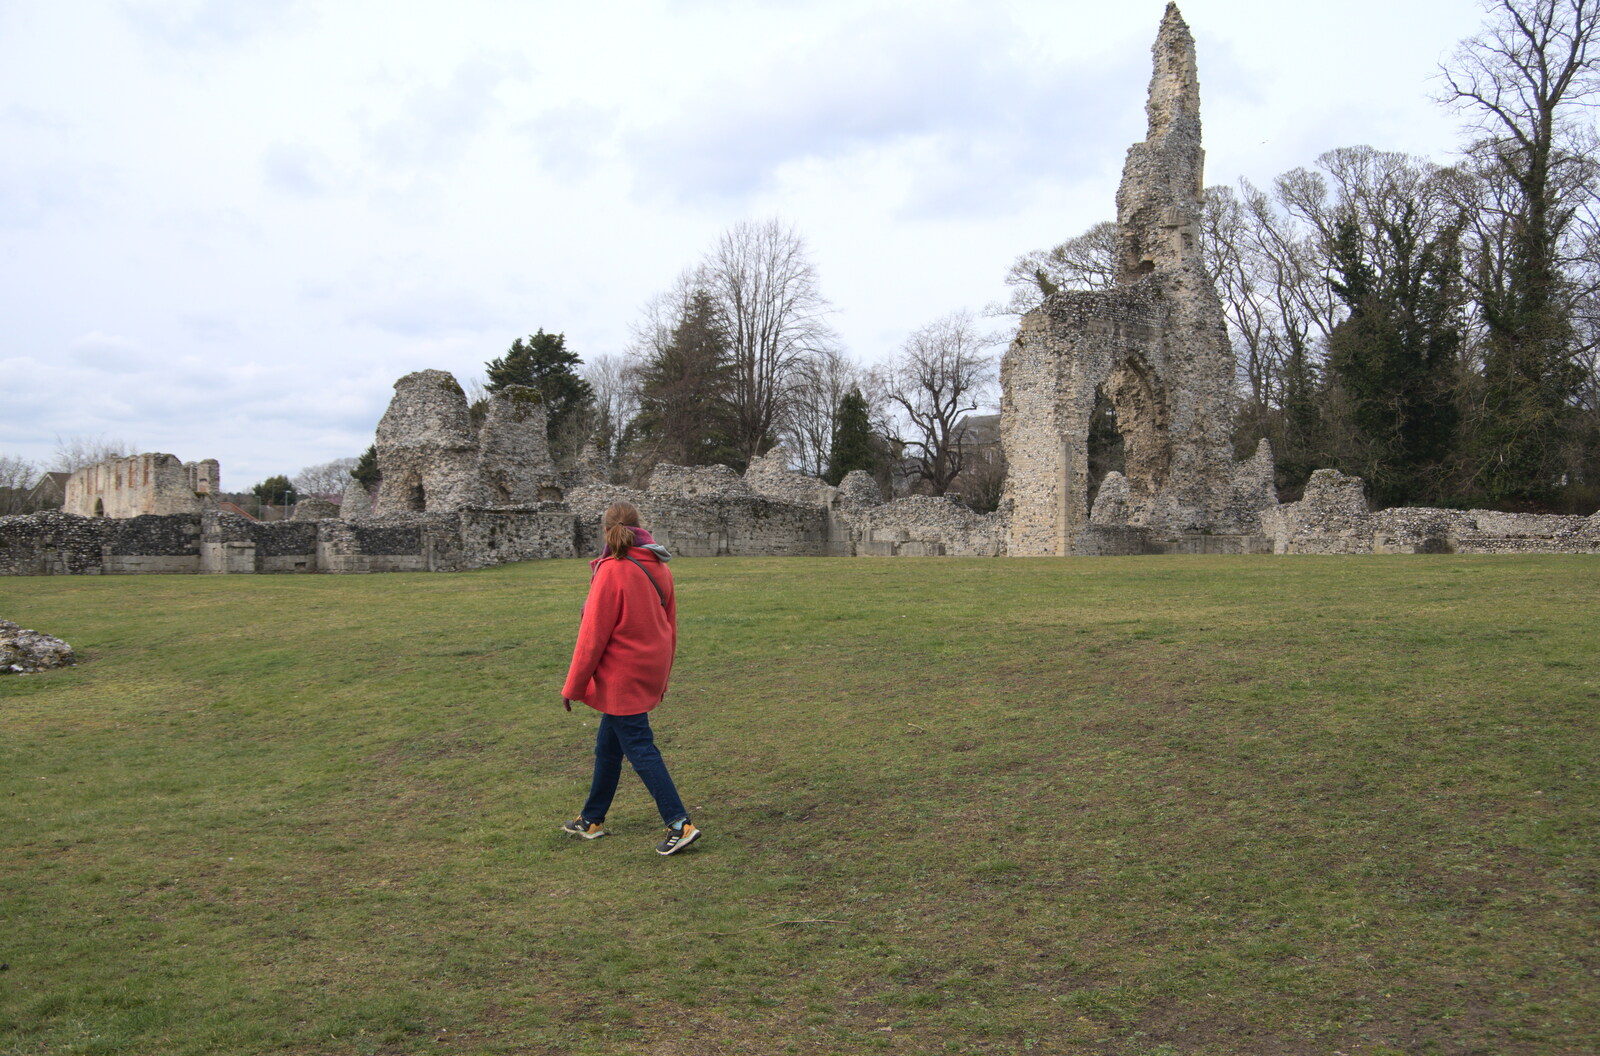 We have a look around Thetford Priory from A Postcard from Thetford, Norfolk - 15th March 2023